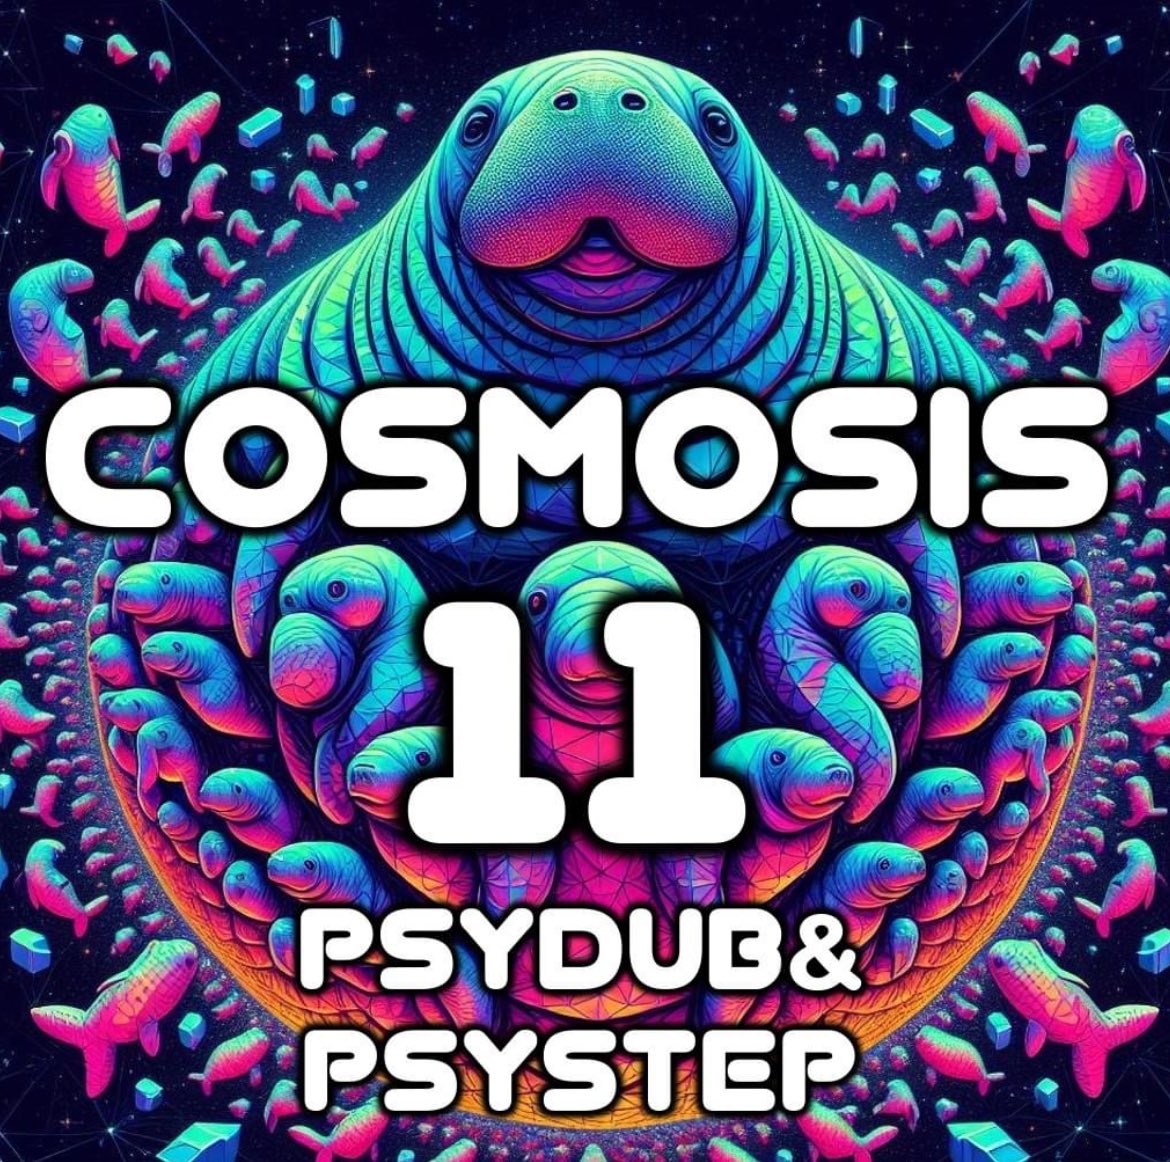 My monthly virtual dance party 'Cosmosis' returns Wednesday 5/1 8:30pm EST. This month: #psystep #psydub #psy #halftime #psychedelic #dubstep #galacticdubs #cosmic #fractal #dubs #twitch #dj twitch.com/seanhoofs